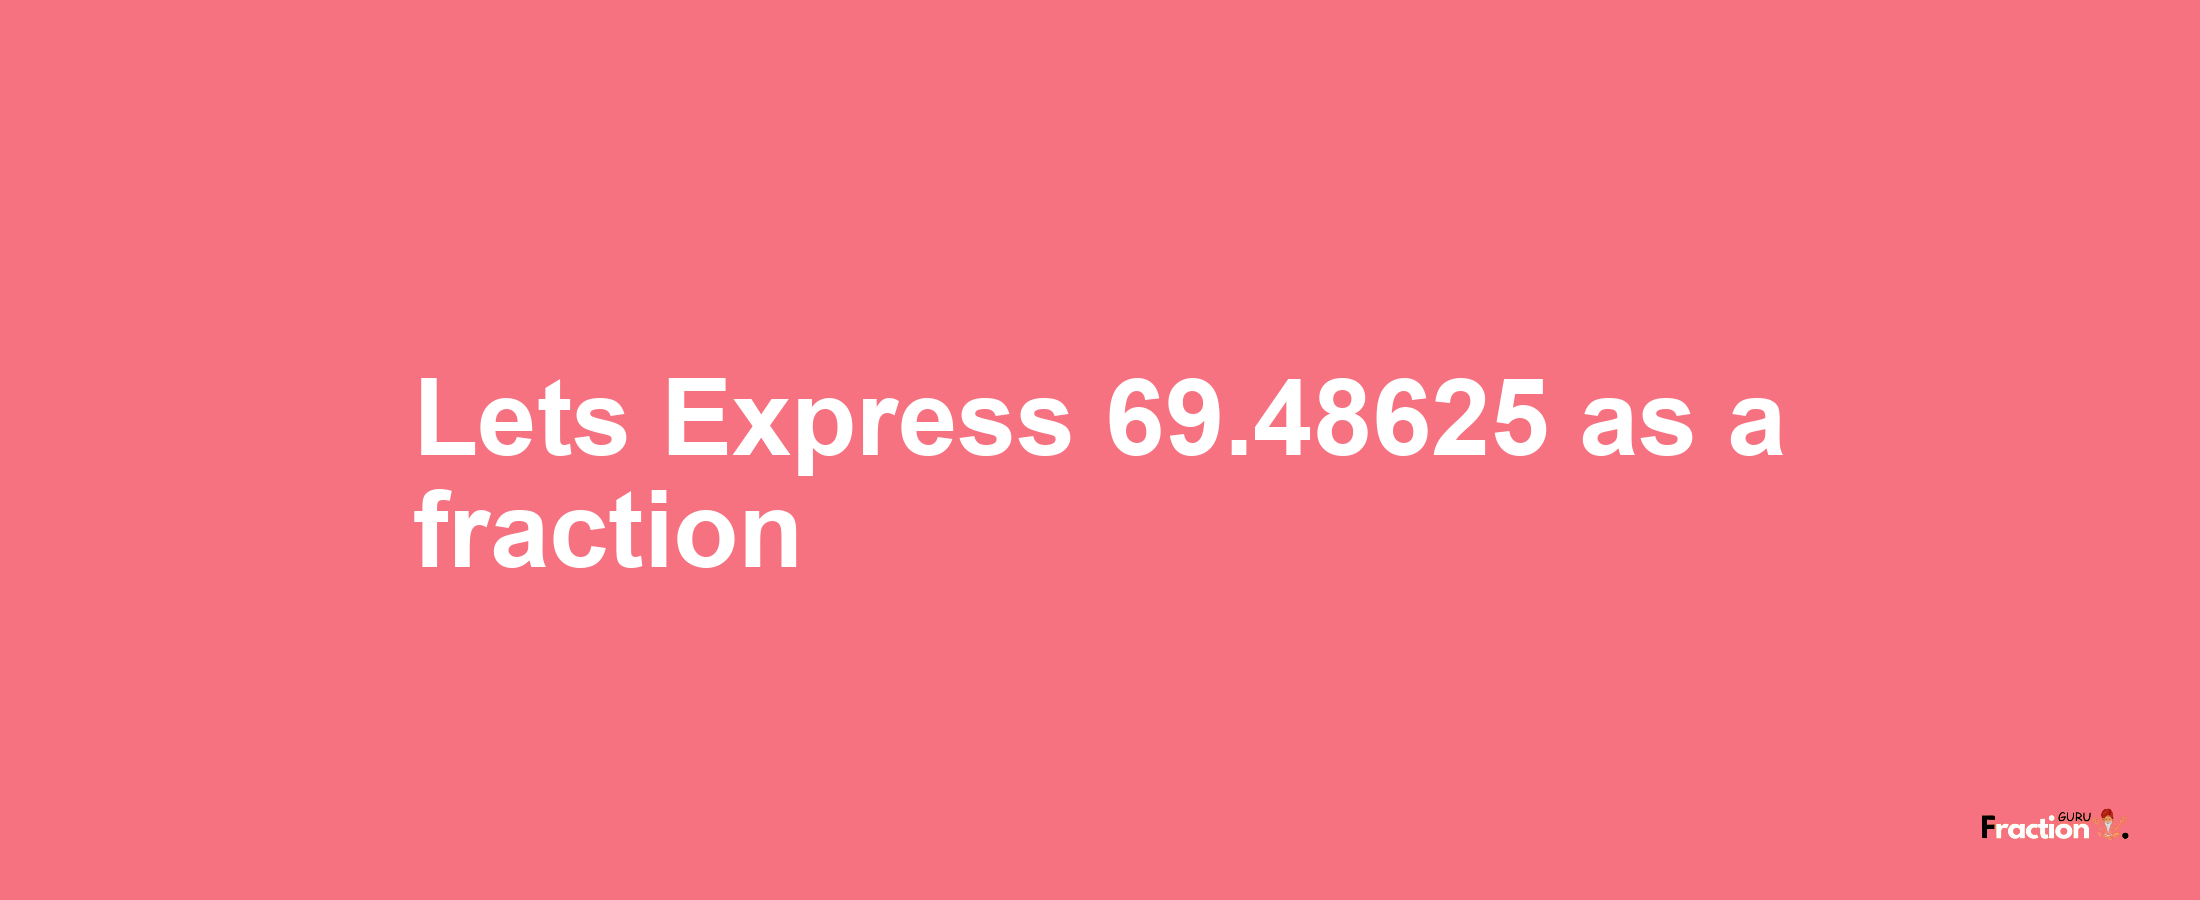 Lets Express 69.48625 as afraction